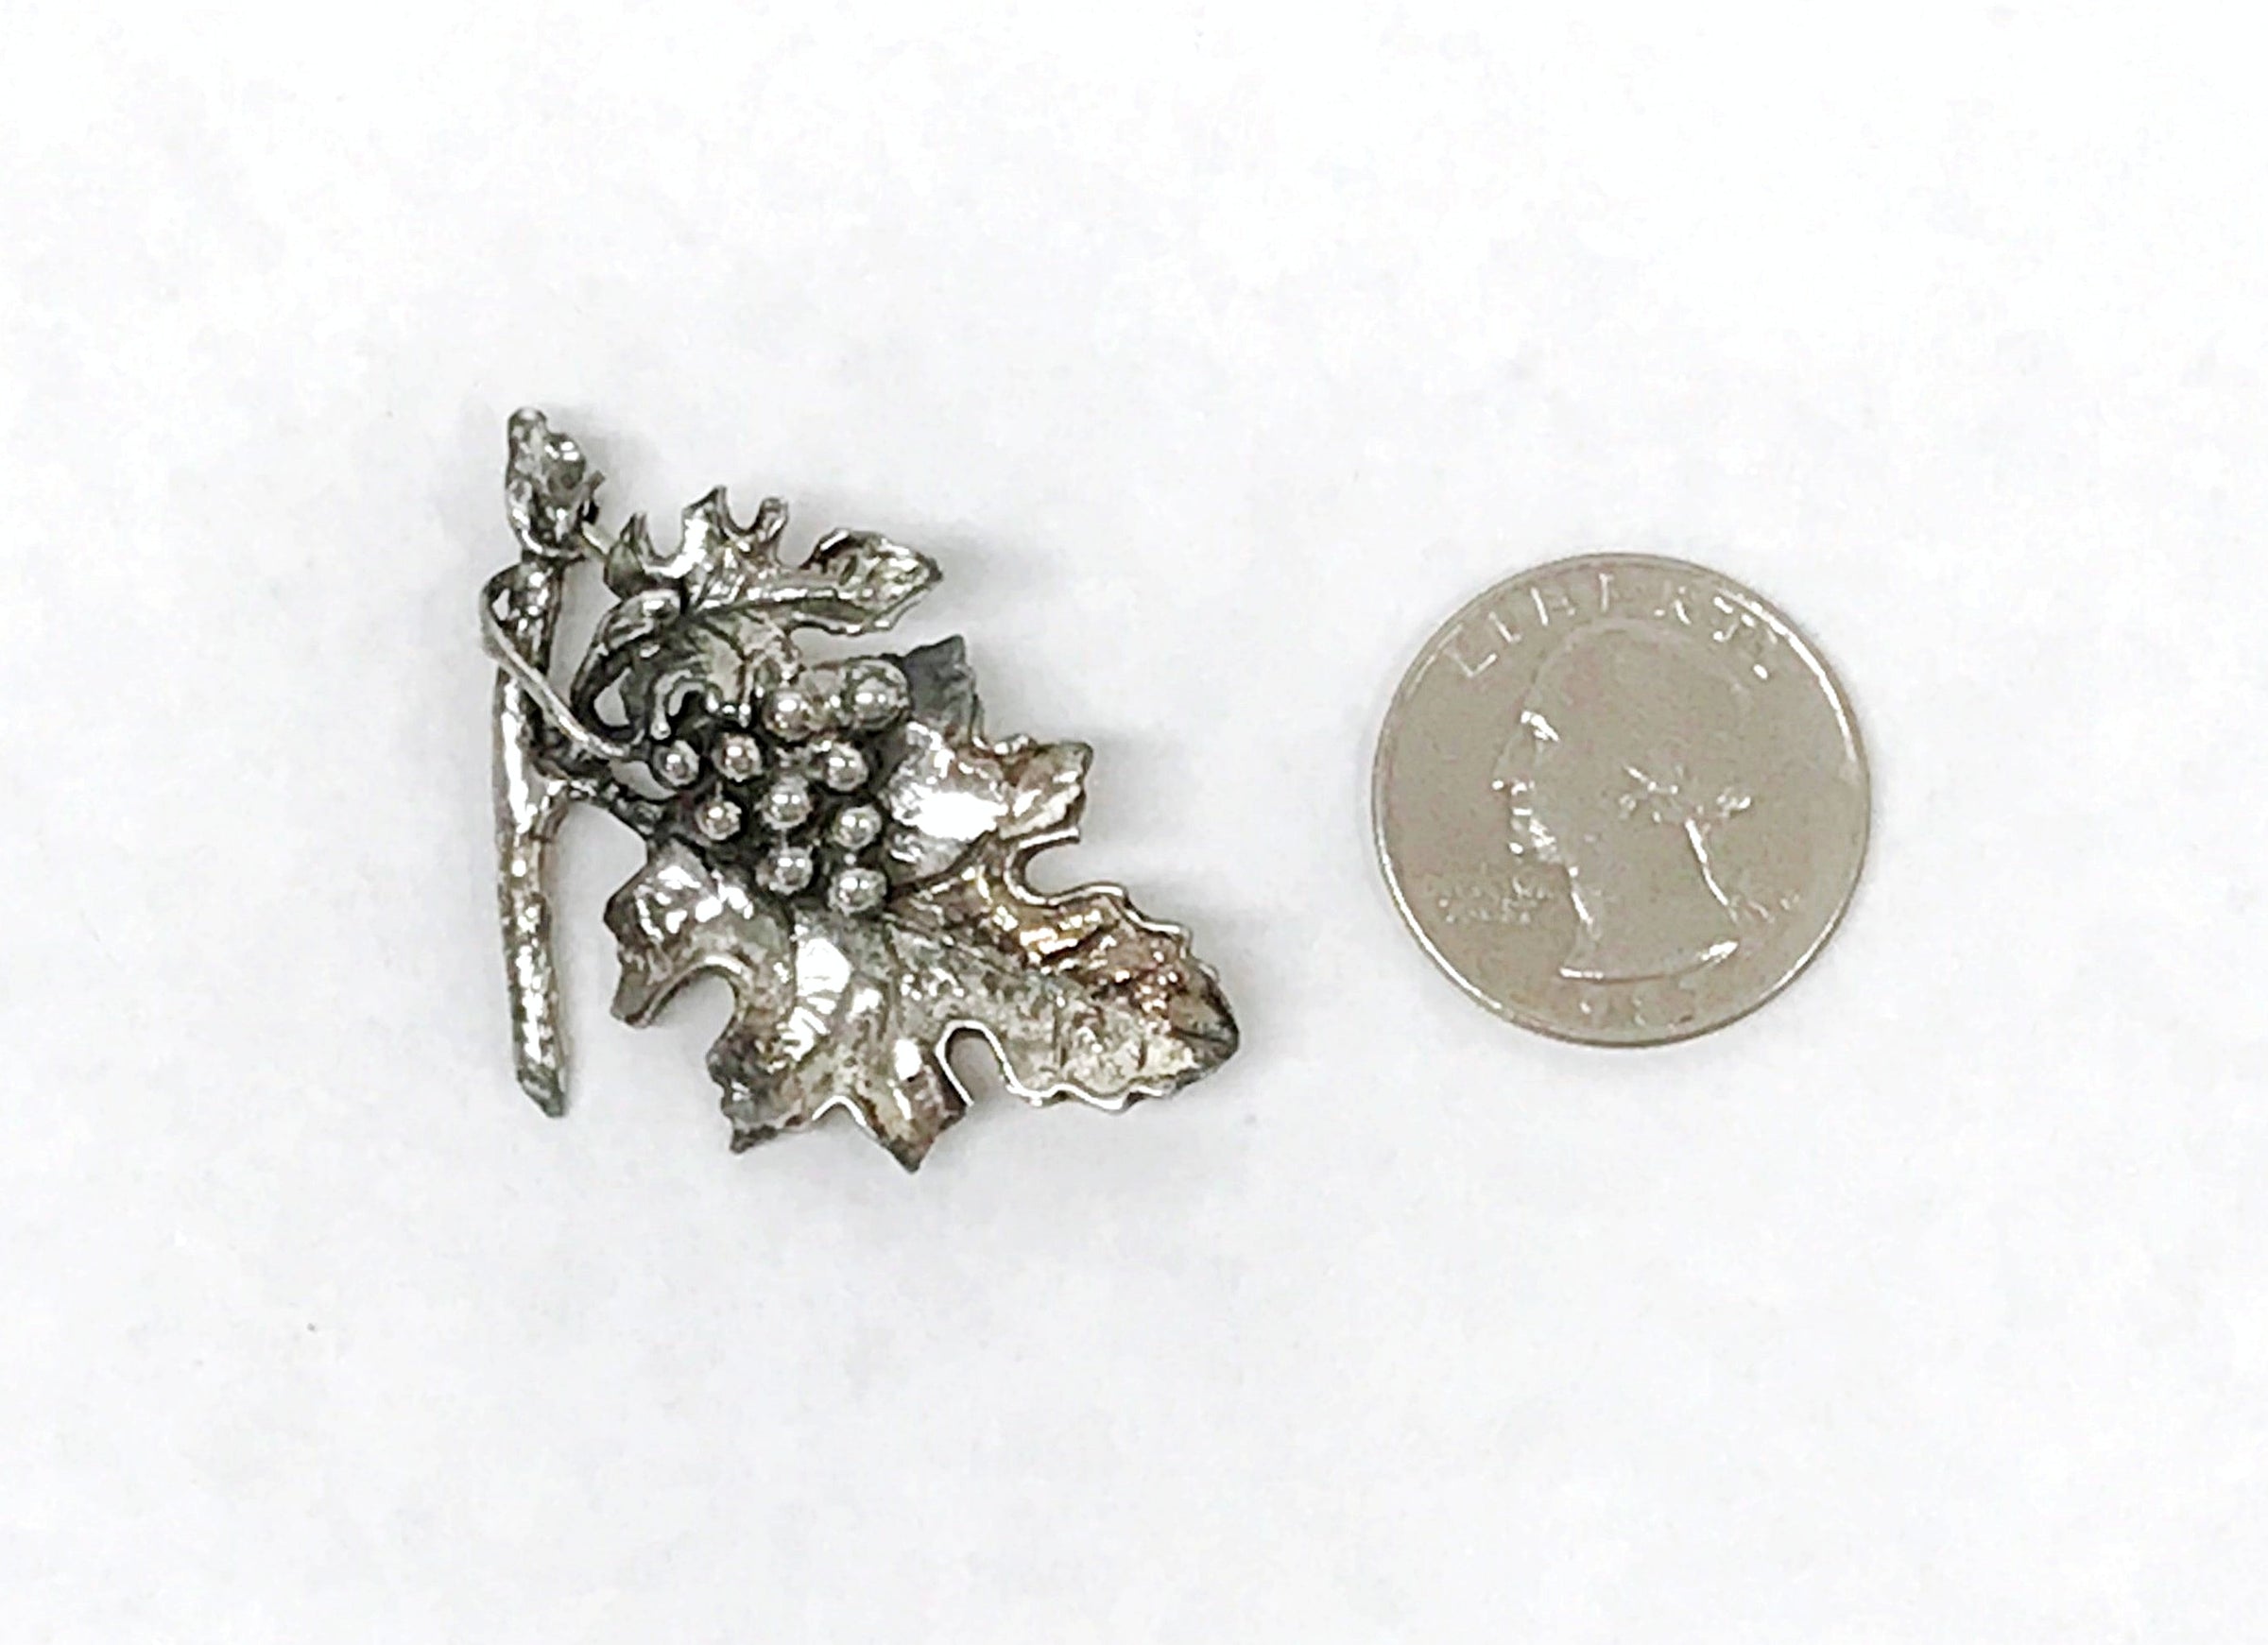 Vintage Danecraft Grapevine Bunch Leaf .925 Sterling Silver Brooch Pin - Hers and His Treasures